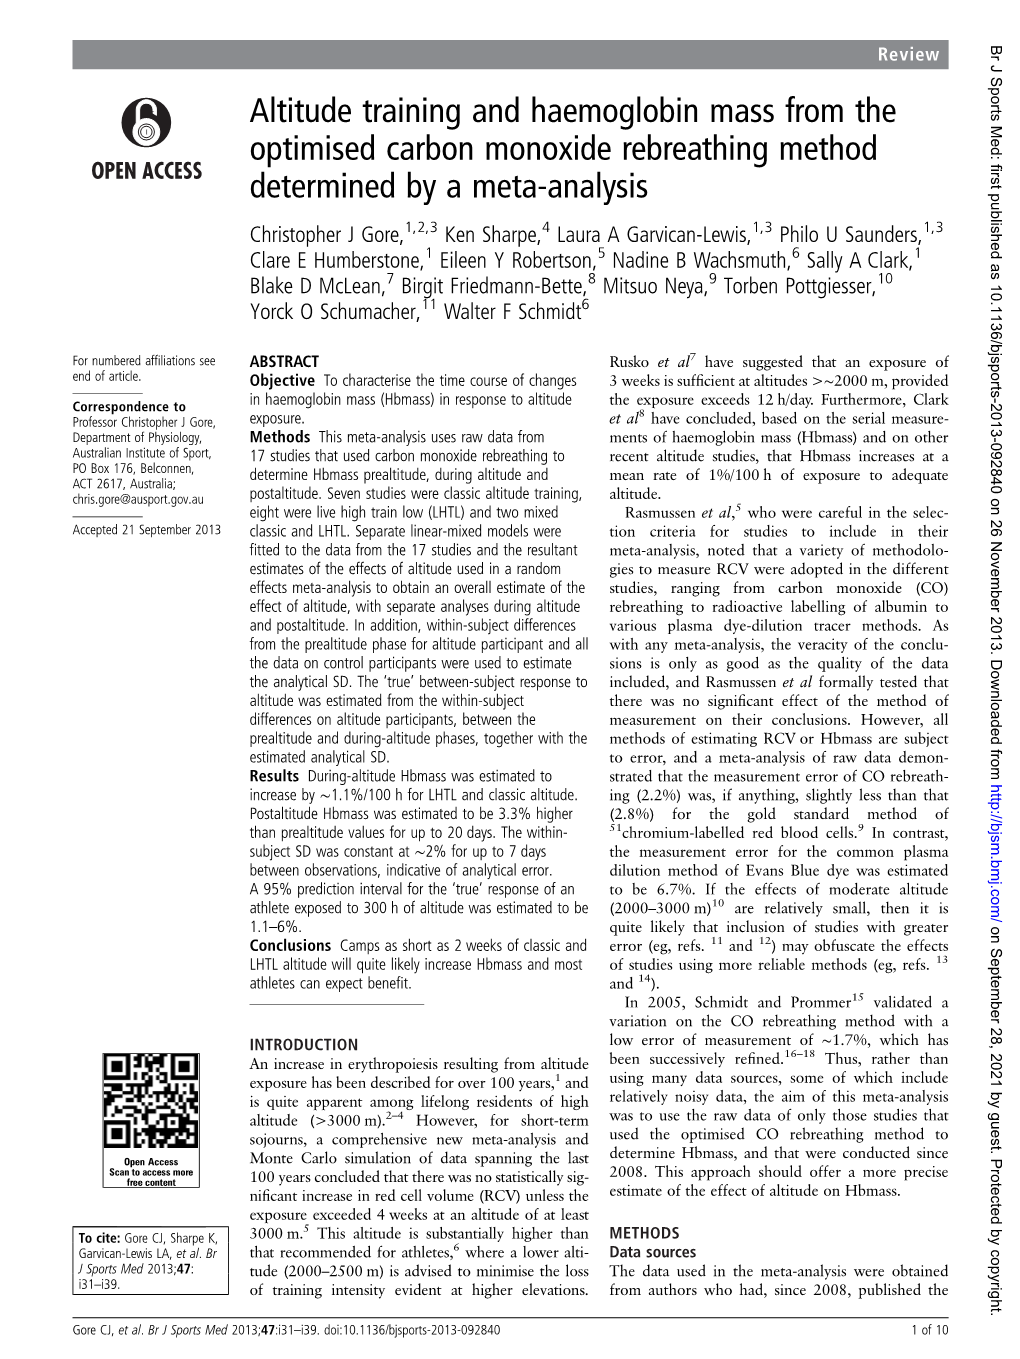 Altitude Training and Haemoglobin Mass from the Optimised Carbon Monoxide Rebreathing Method Determined by a Meta-Analysis